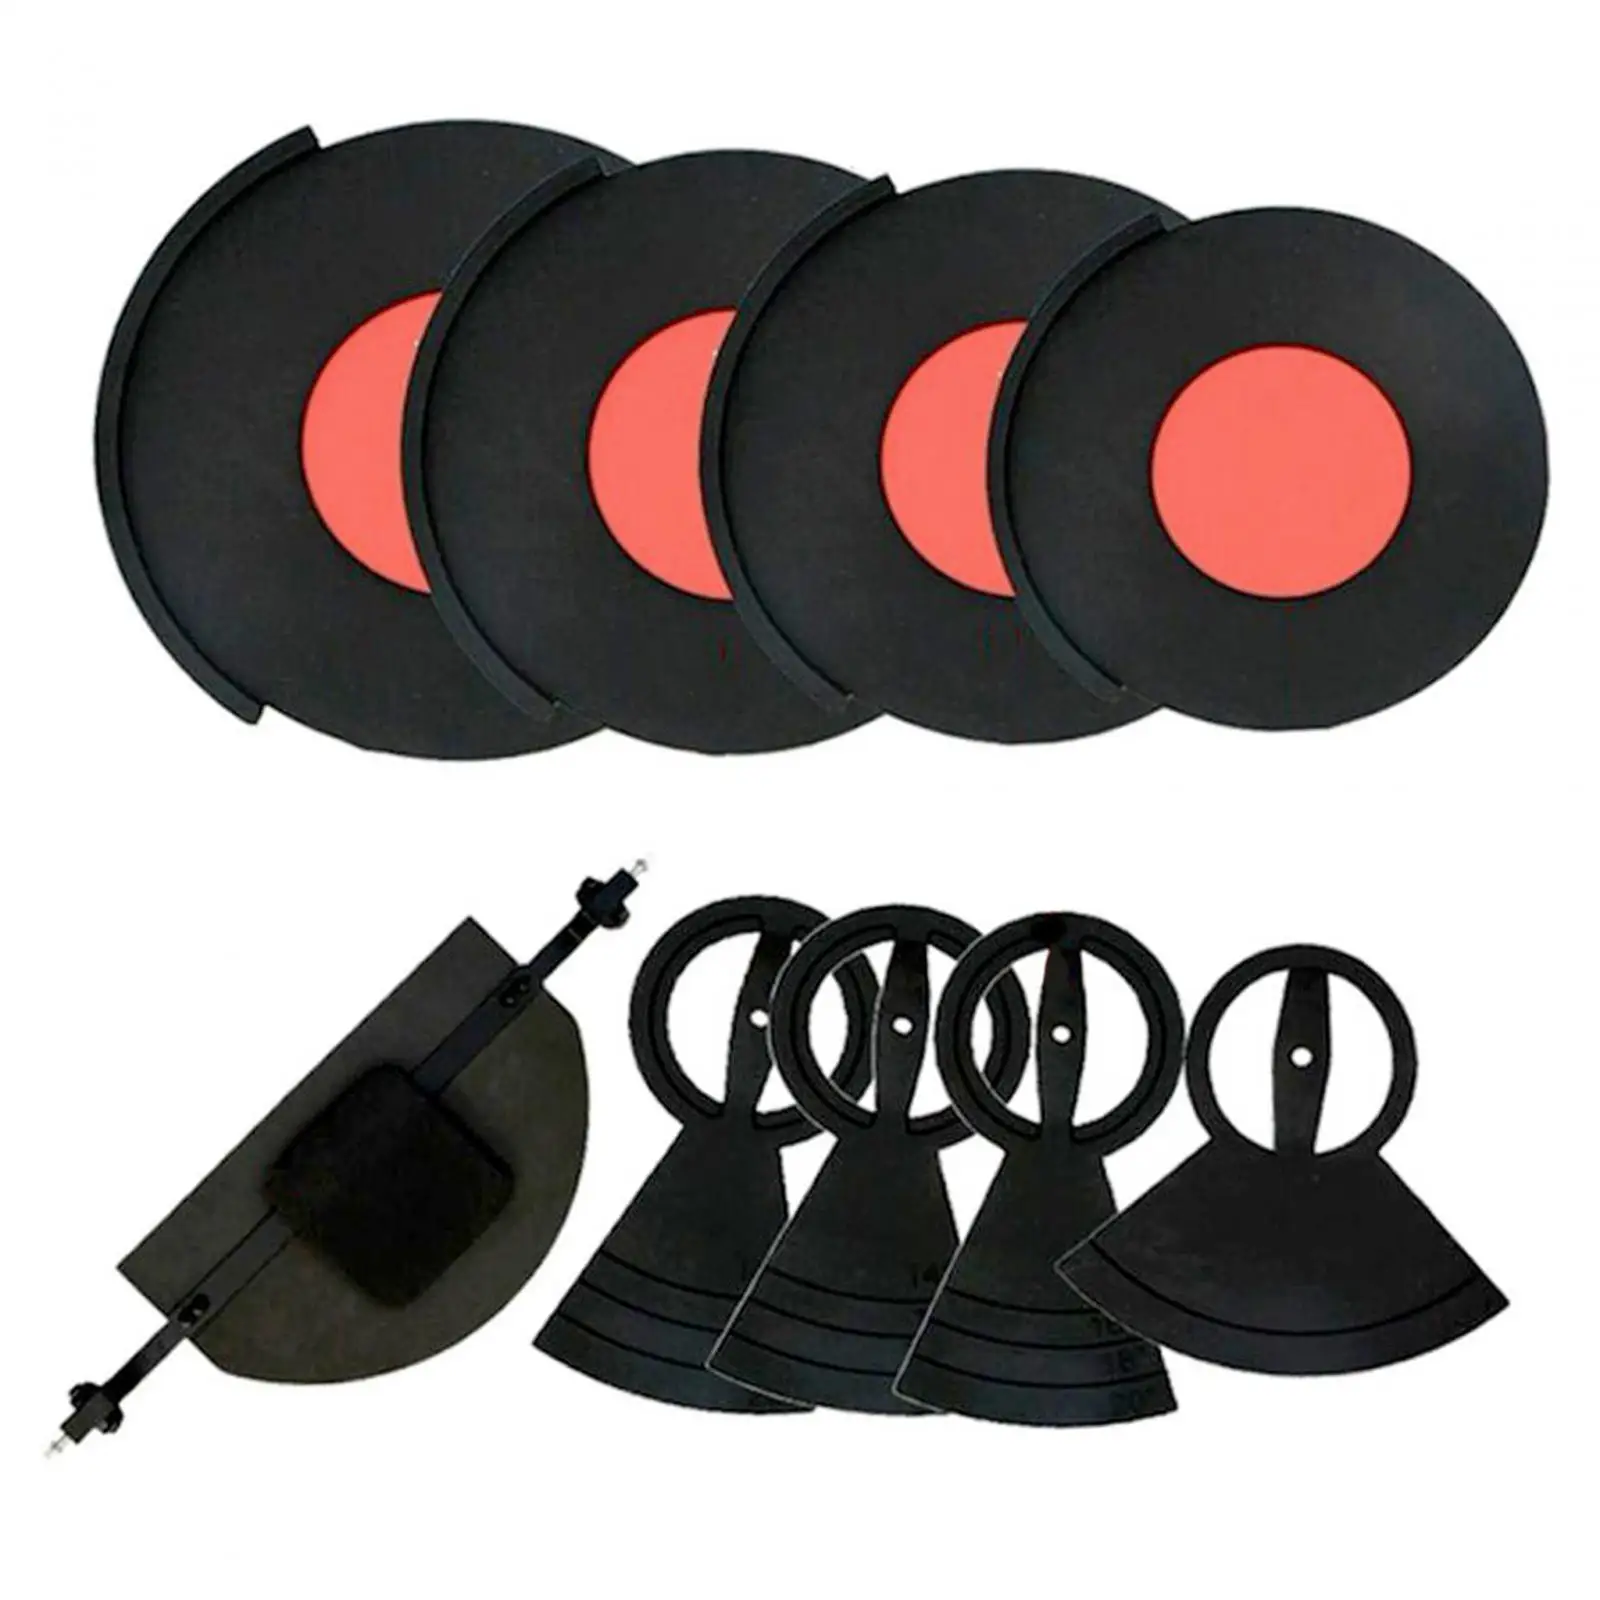 7x Drum Mute Pads Set and Cymbal Mutes Practicing Pad Bass Drum Mutes Pad